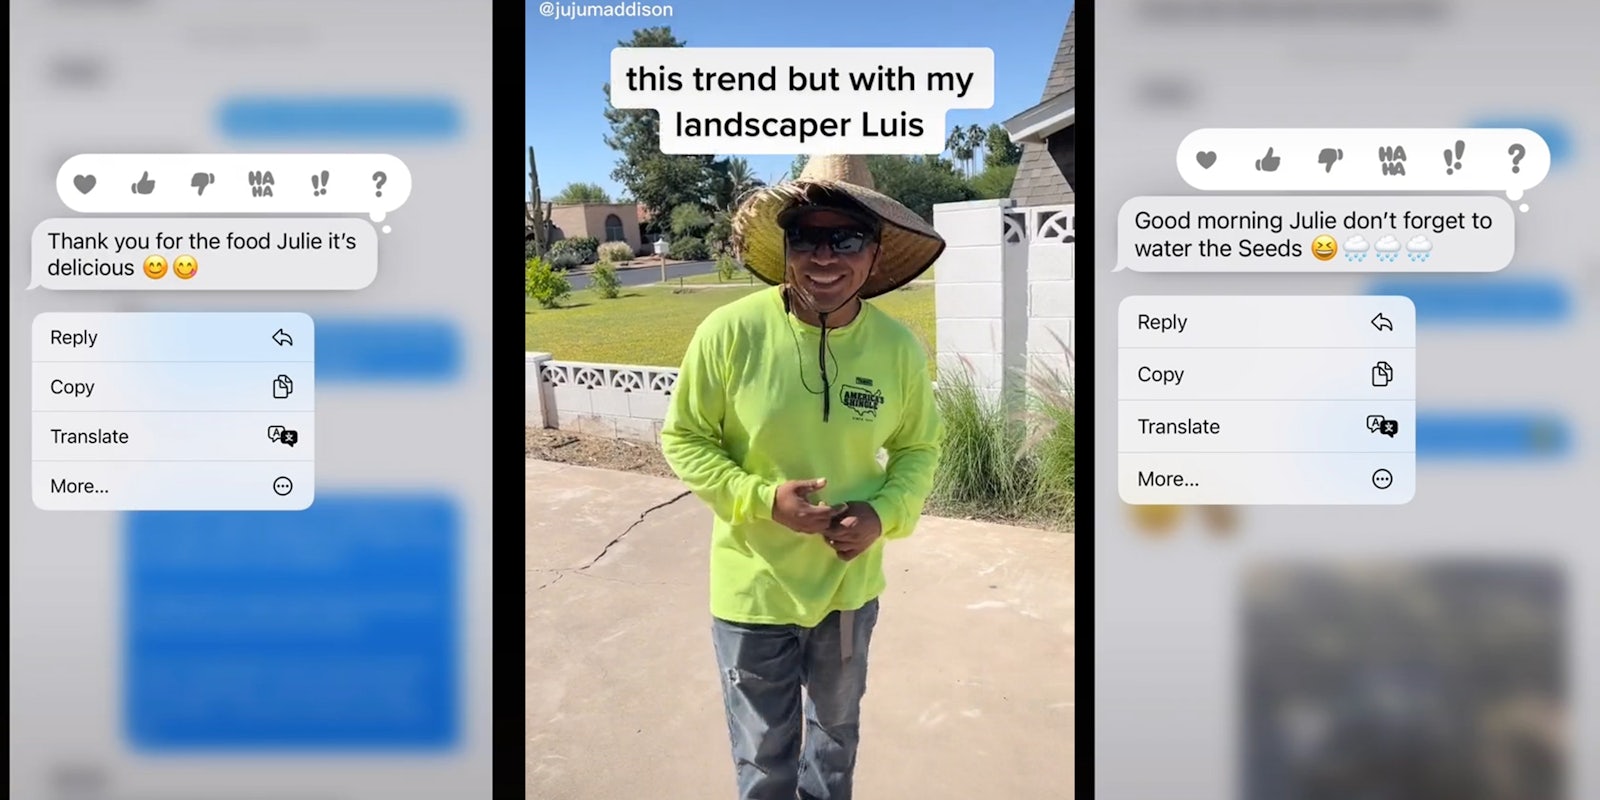 text message 'Thank you for the food Julie it's delicious' (l) Man in driveway with caption 'this trend but with my landscaper Luis' (c) text message 'Good morning Julie don't forget to water the Seeds' (r)